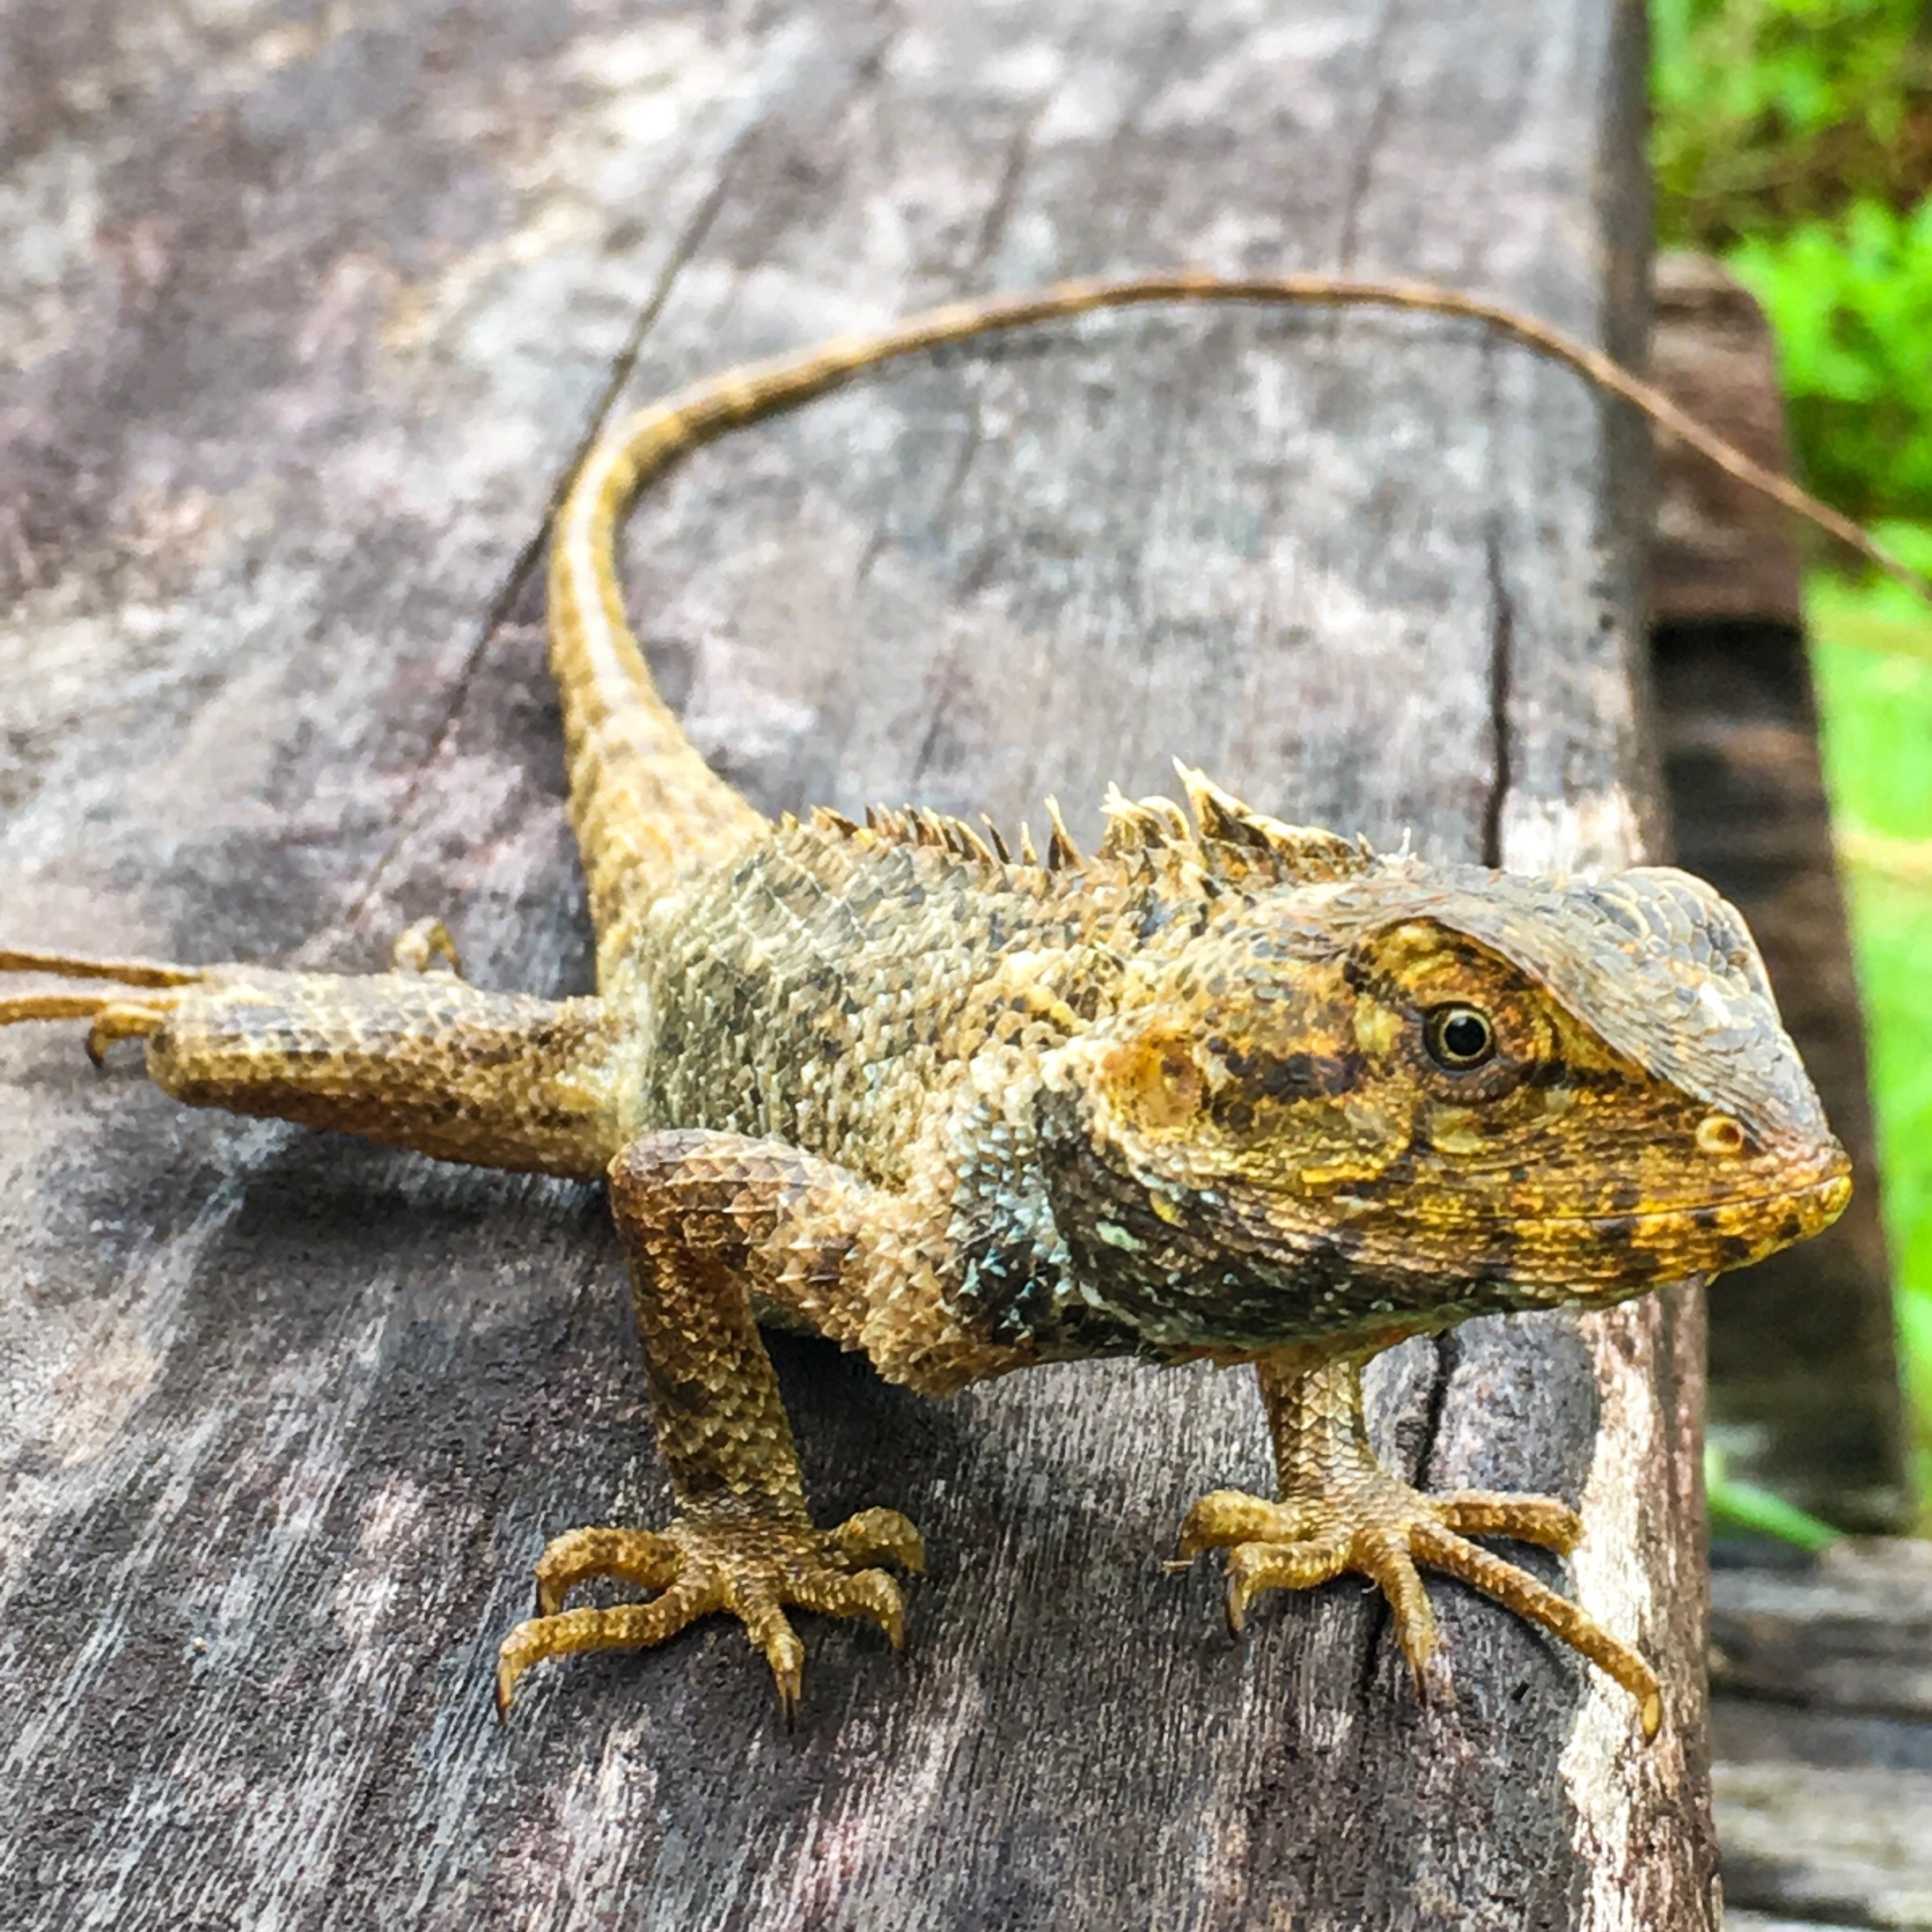 A nice place to take a morning walk and get to see local flora and fauna like this lizard. 